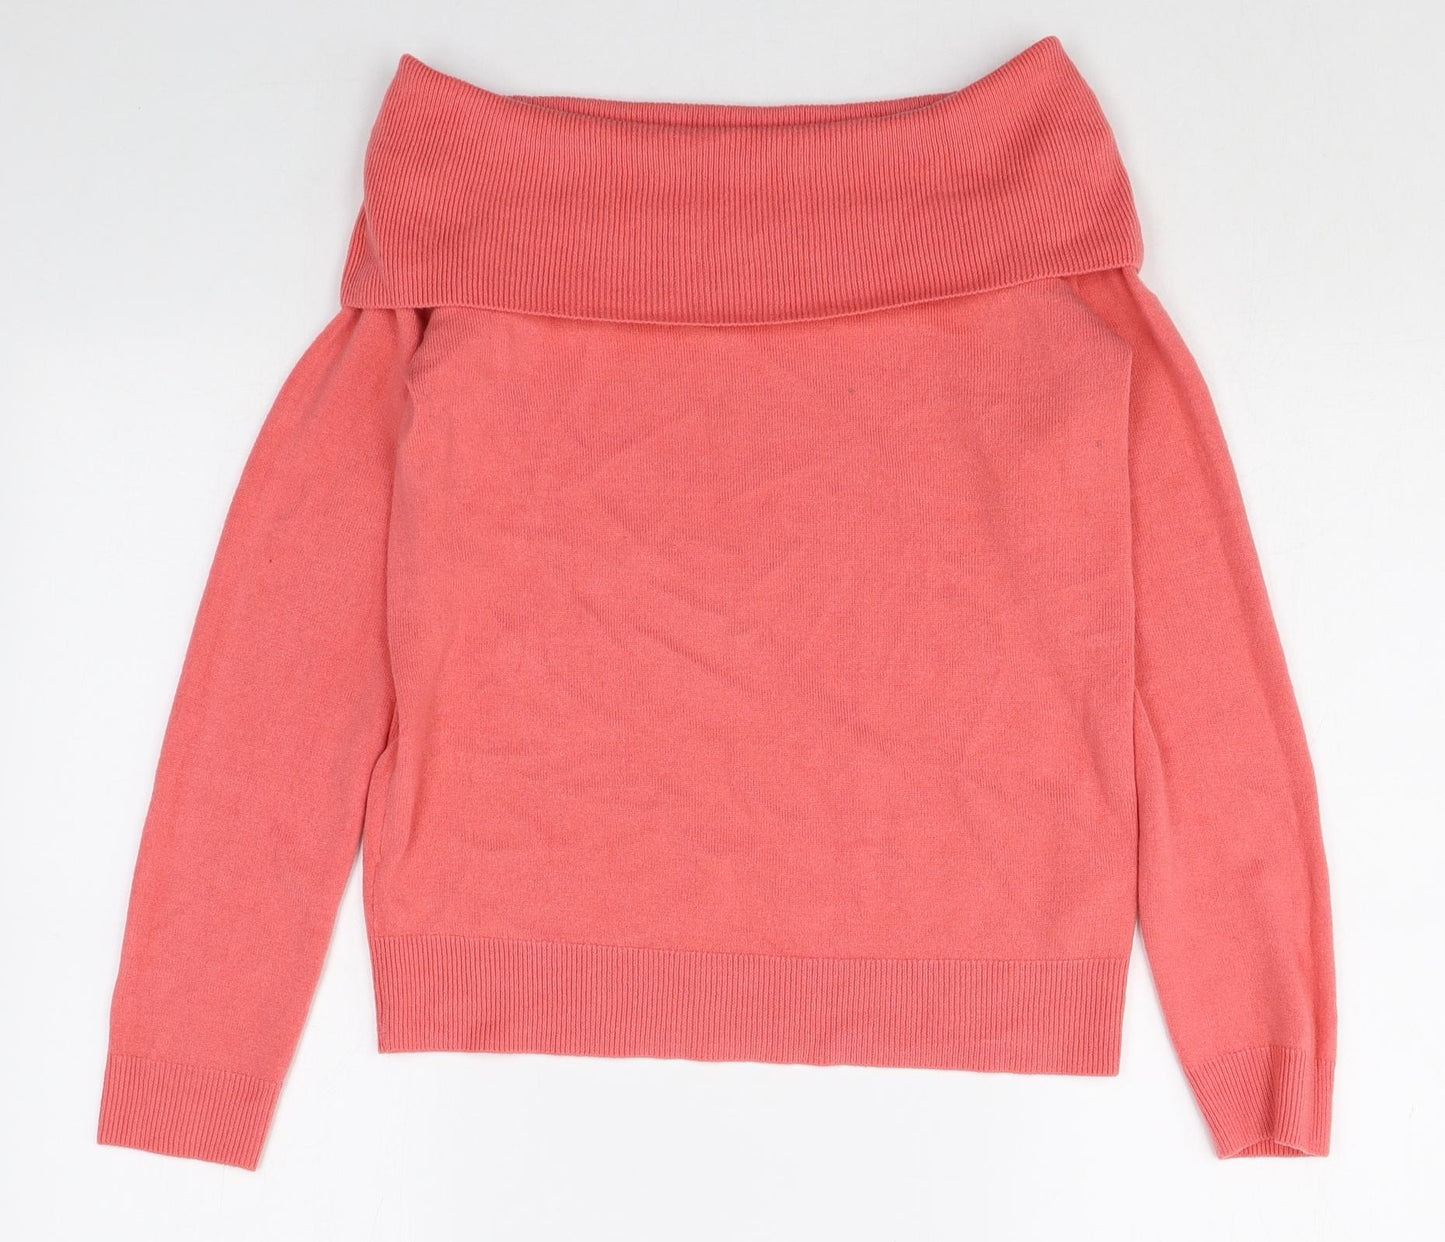 NEXT Womens Pink Roll Neck Acrylic Pullover Jumper Size 8 Pullover